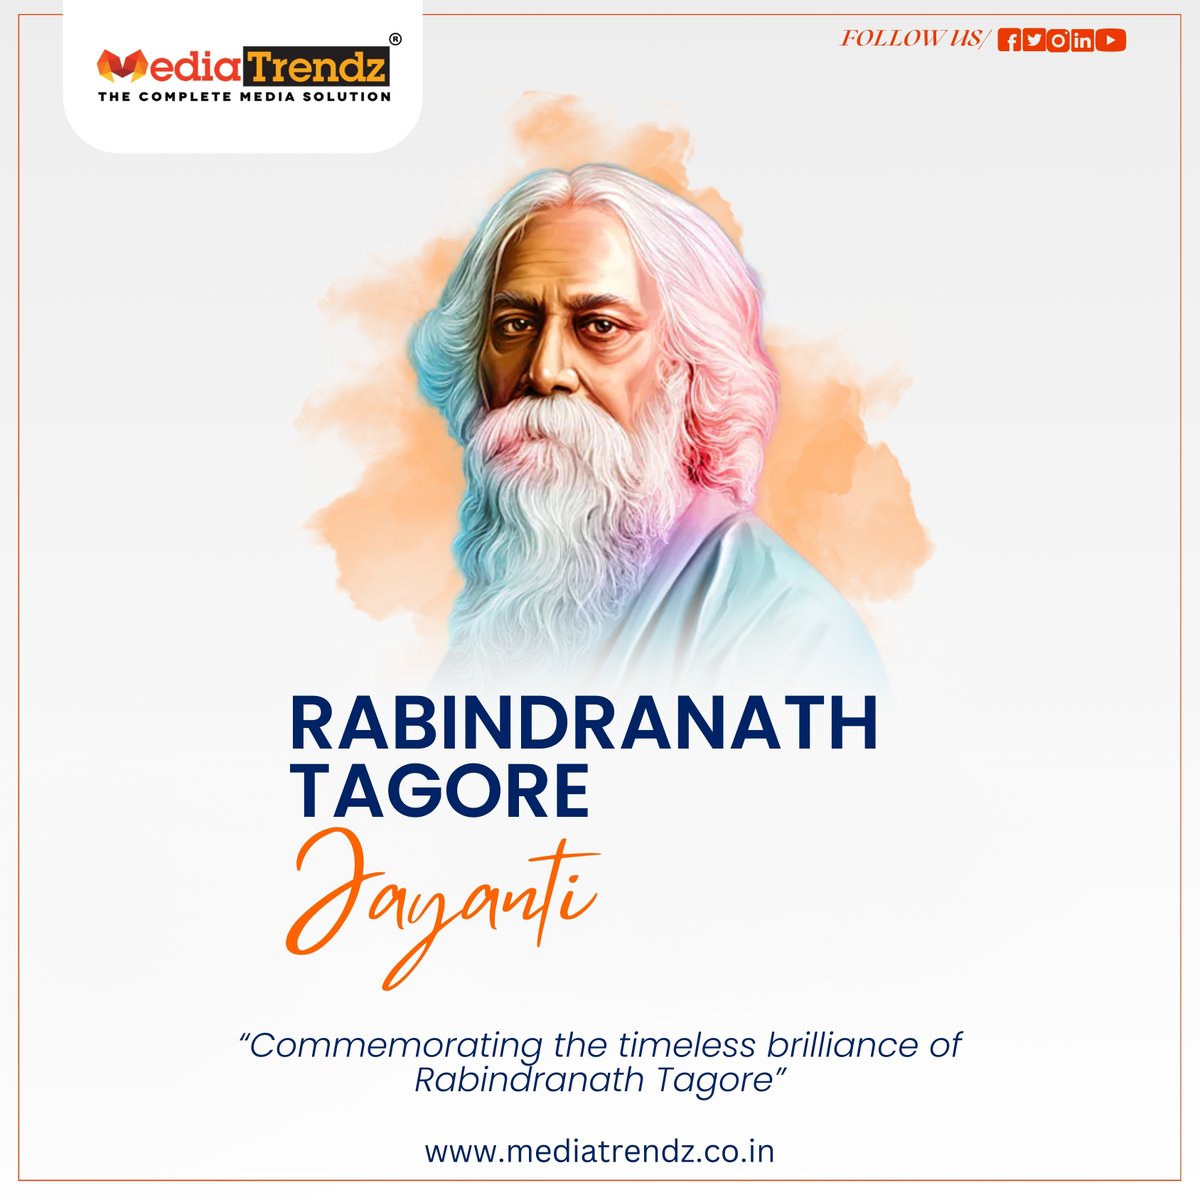 Celebrating the timeless wisdom and poetic brilliance of Rabindranath Tagore on his Jayanti 🎉
.
#MediaTrendz #TagoreJayanti #Inspiration #LiteraryLegend
#RabindranathTagore #LiteraryIcon #Poetry #Inspiration #IndianLiterature #BengaliPoet #Philosophy #Artistry #CulturalHeritage